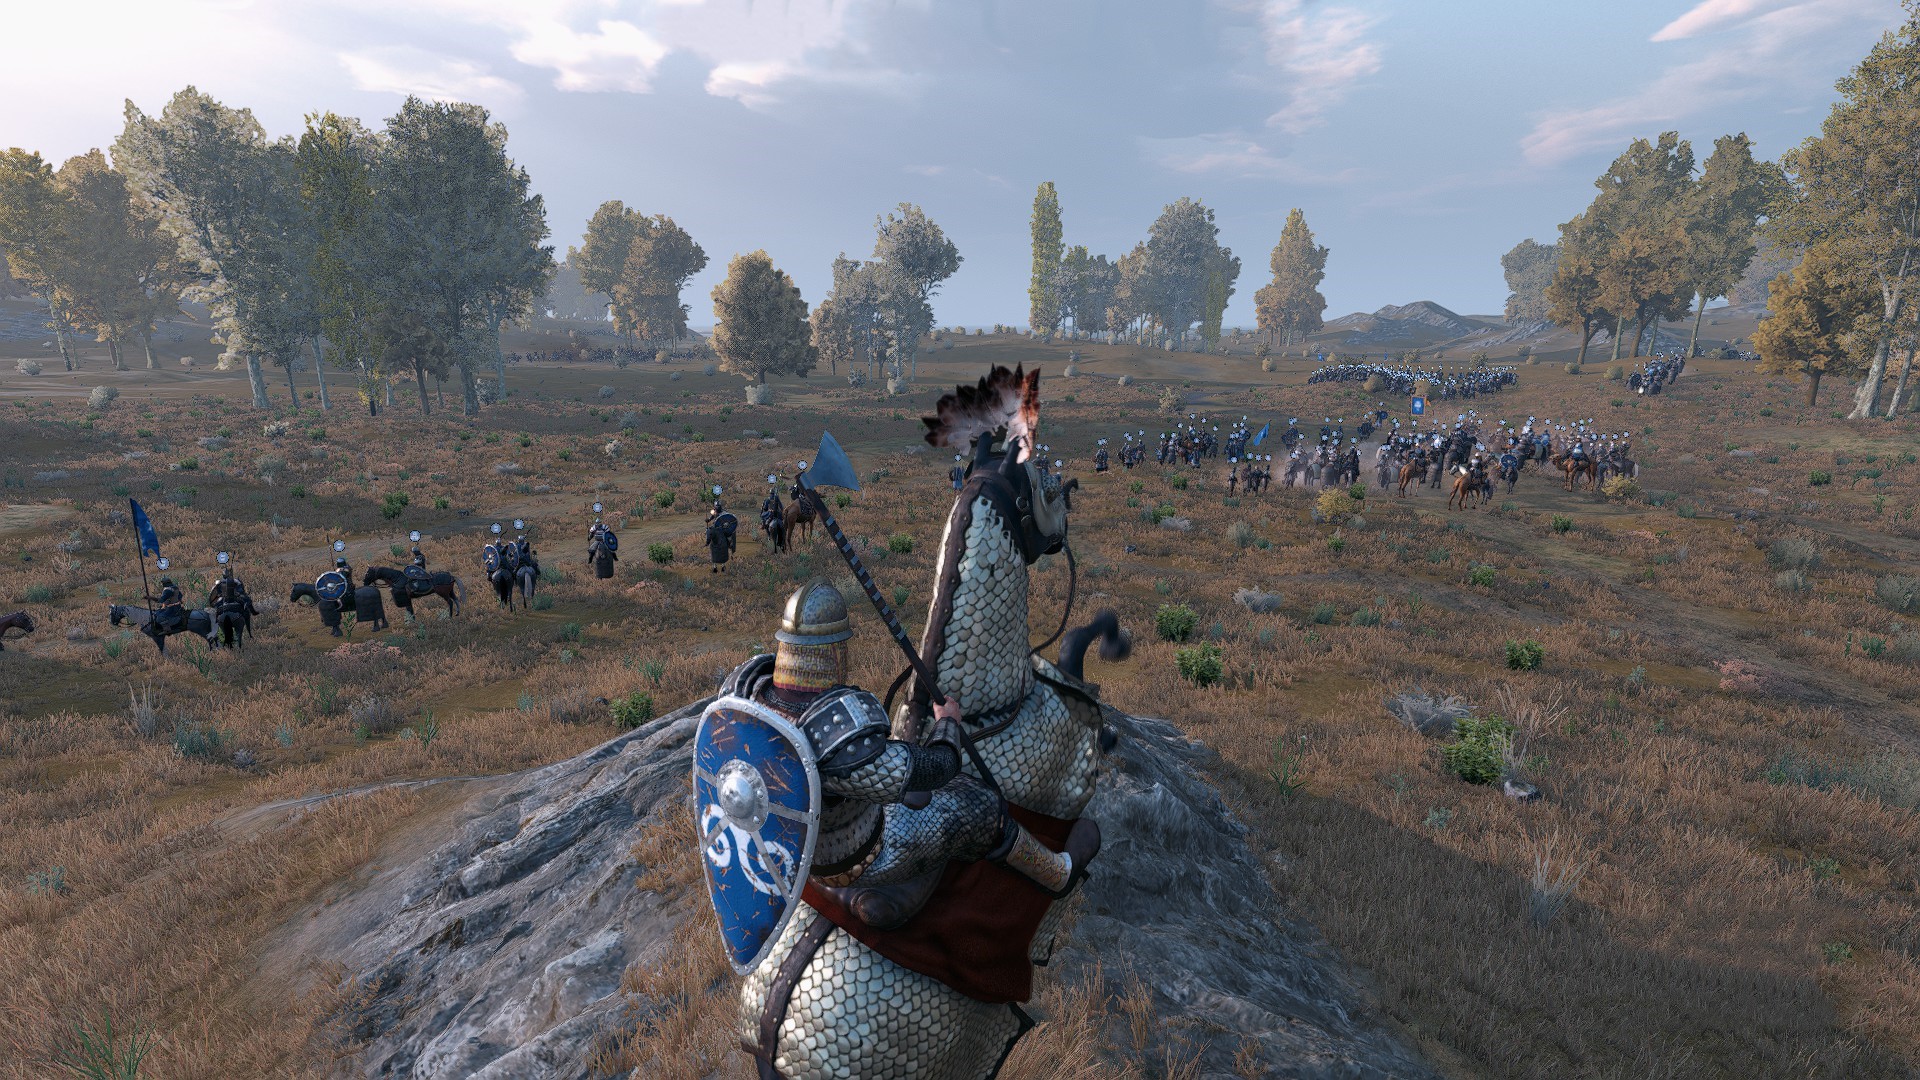 General 1920x1080 video games knight horse horseback shield weapon trees field sky clouds armor army CGI Mount & Blade